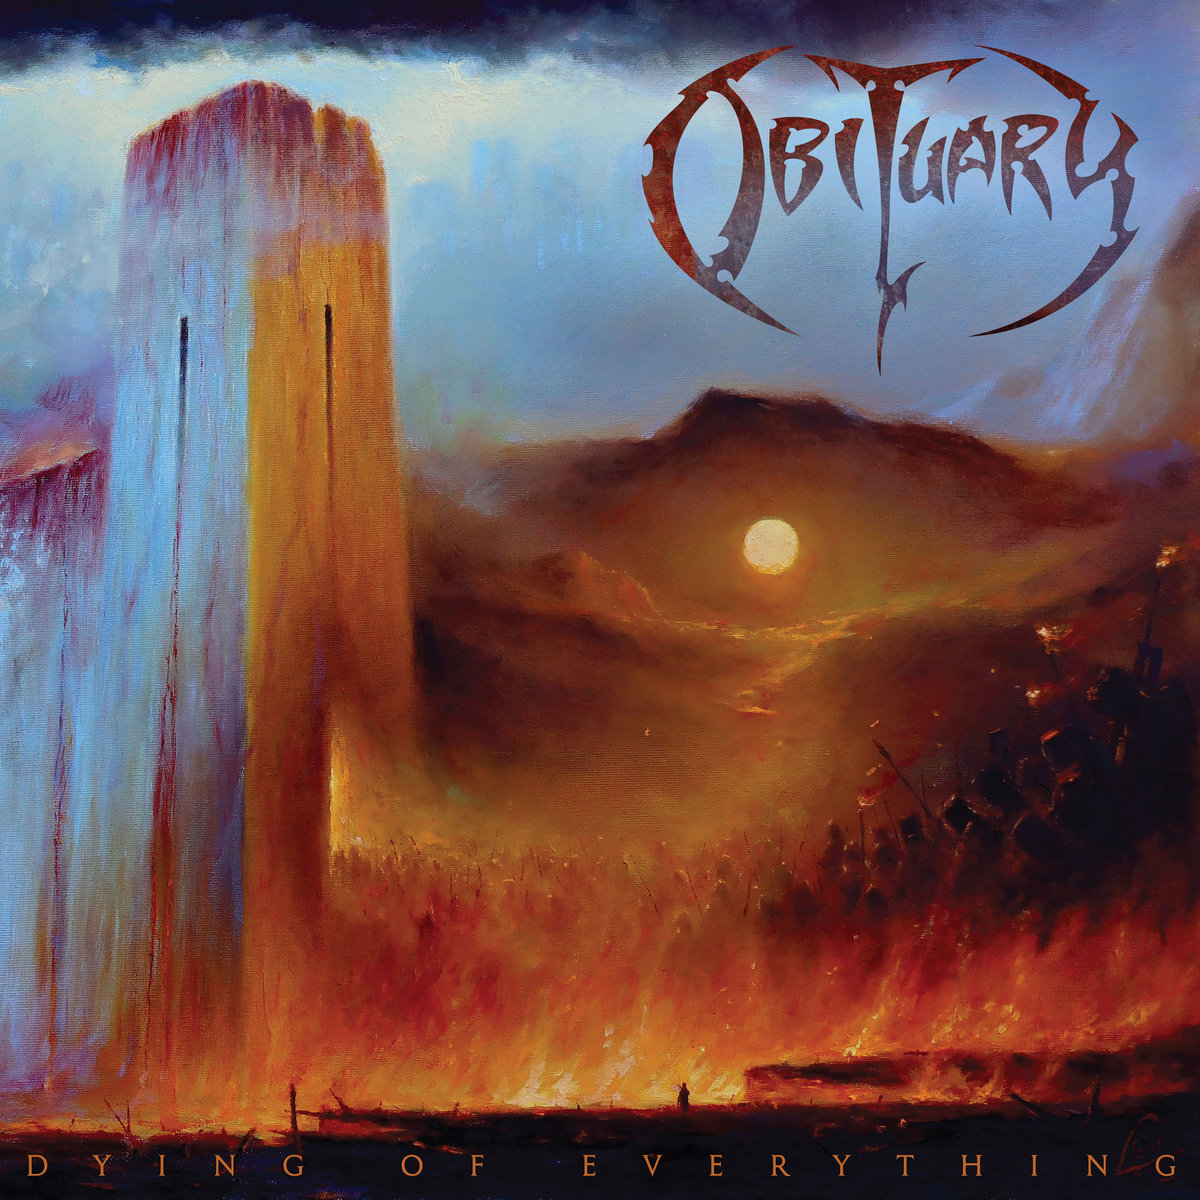 Cover art for Dying of Everything by Obituary. A painting of a tower on a sand dune.